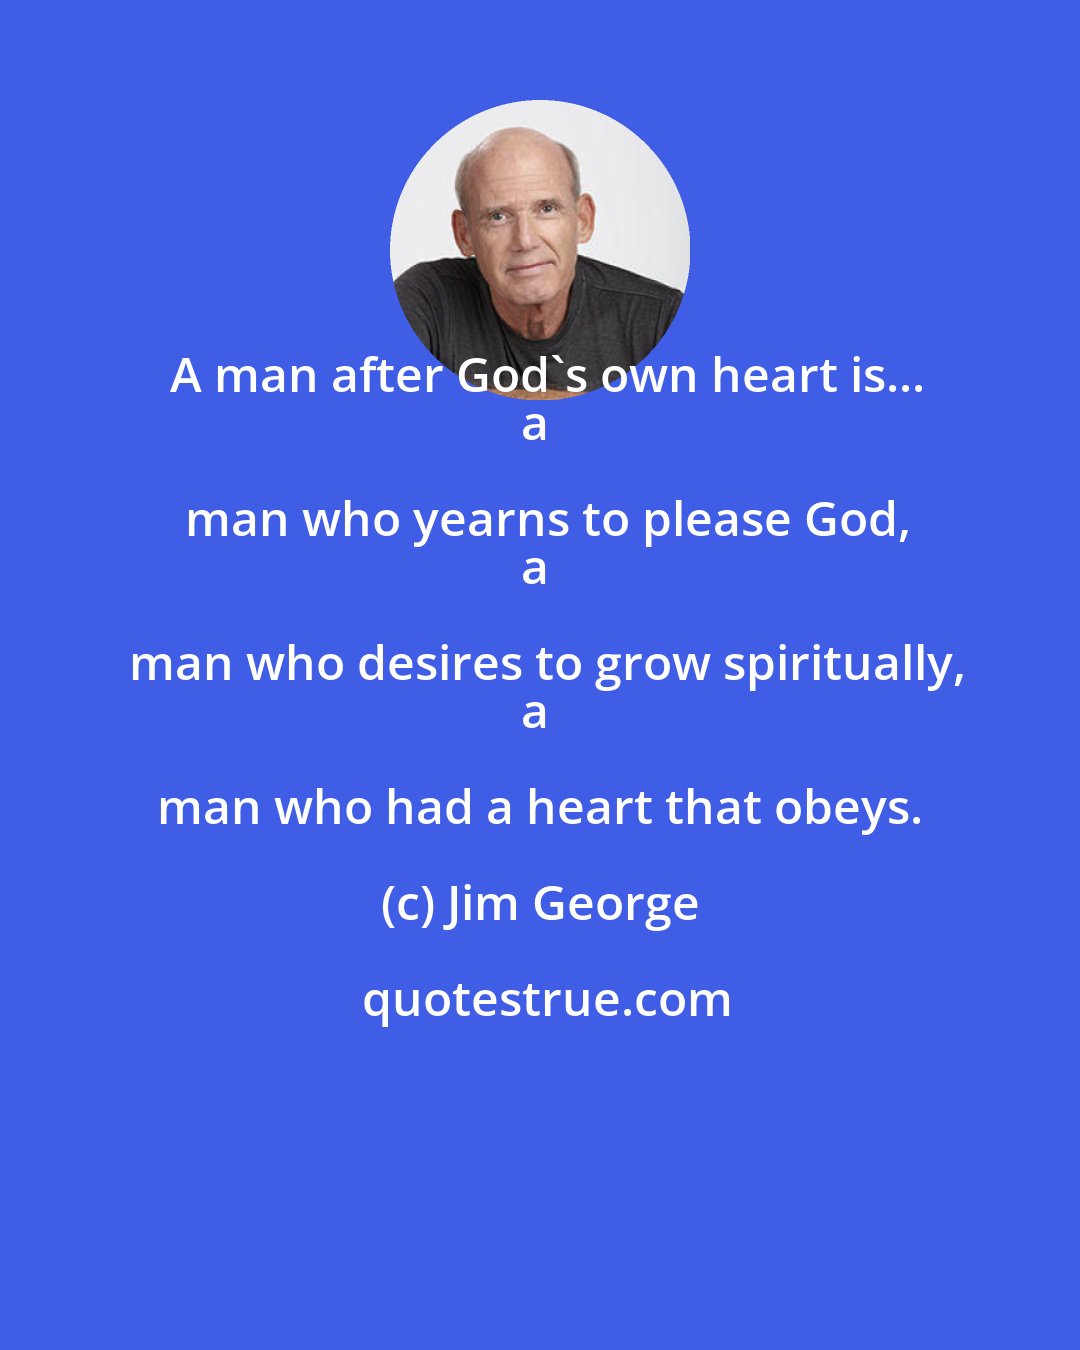 Jim George: A man after God's own heart is...
a man who yearns to please God,
a man who desires to grow spiritually,
a man who had a heart that obeys.